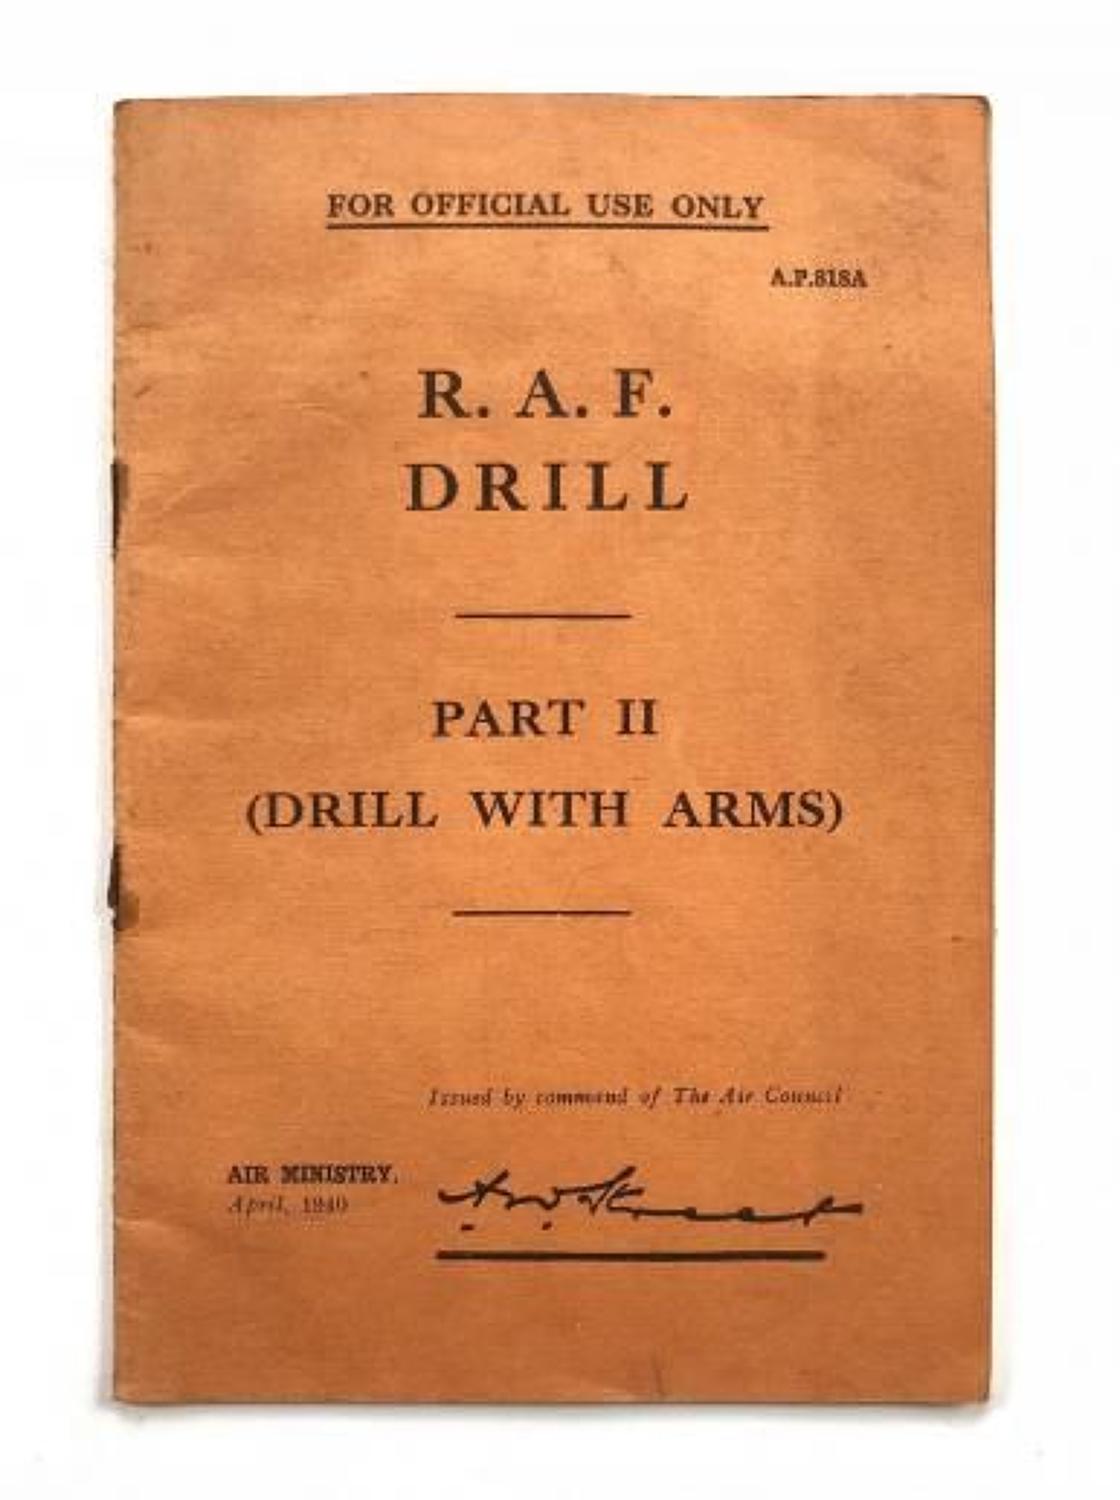 WW2 RAF 1940 Drill Manual Part II Drill with Arms.